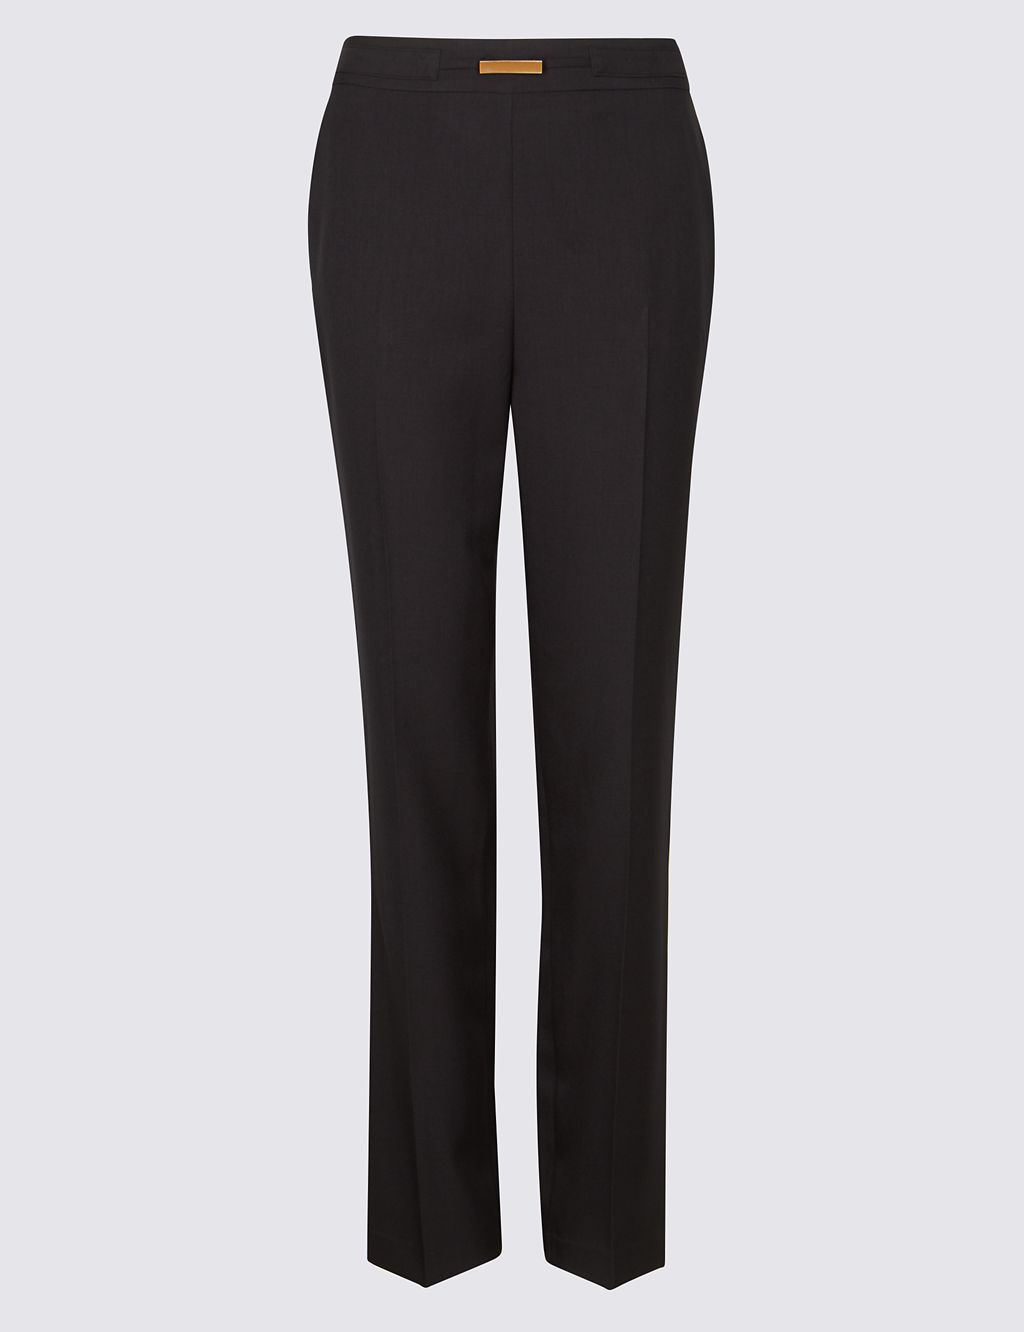 Bar Detail Trousers 1 of 6